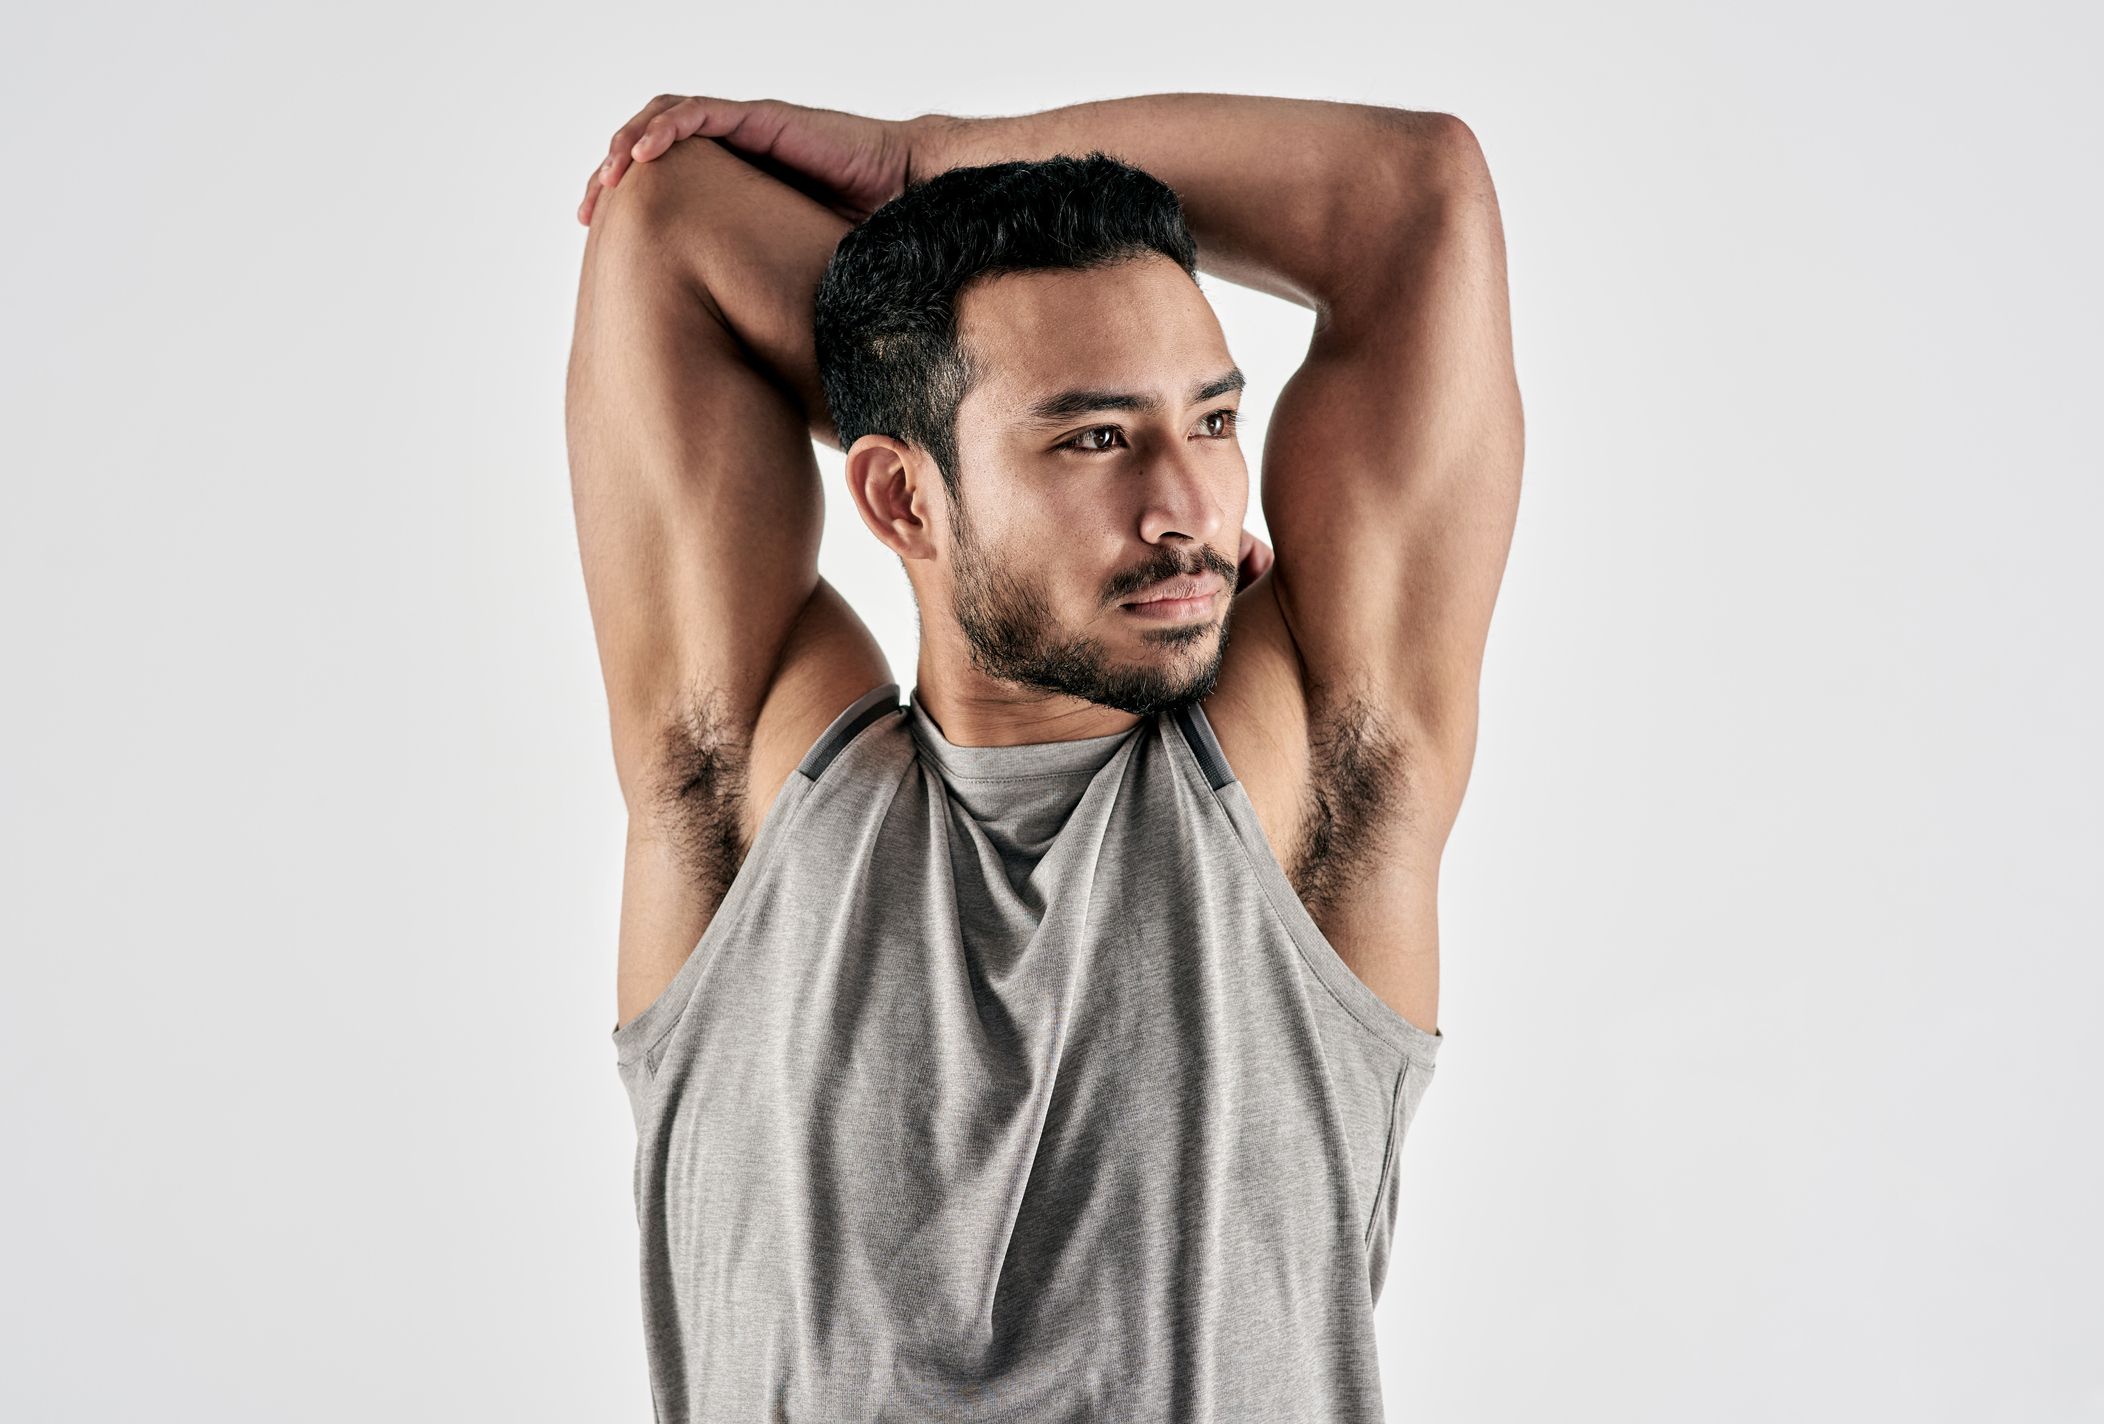 4 Men With an Armpit Fetish (Maschanlagnia) Share Their Sex Lives picture